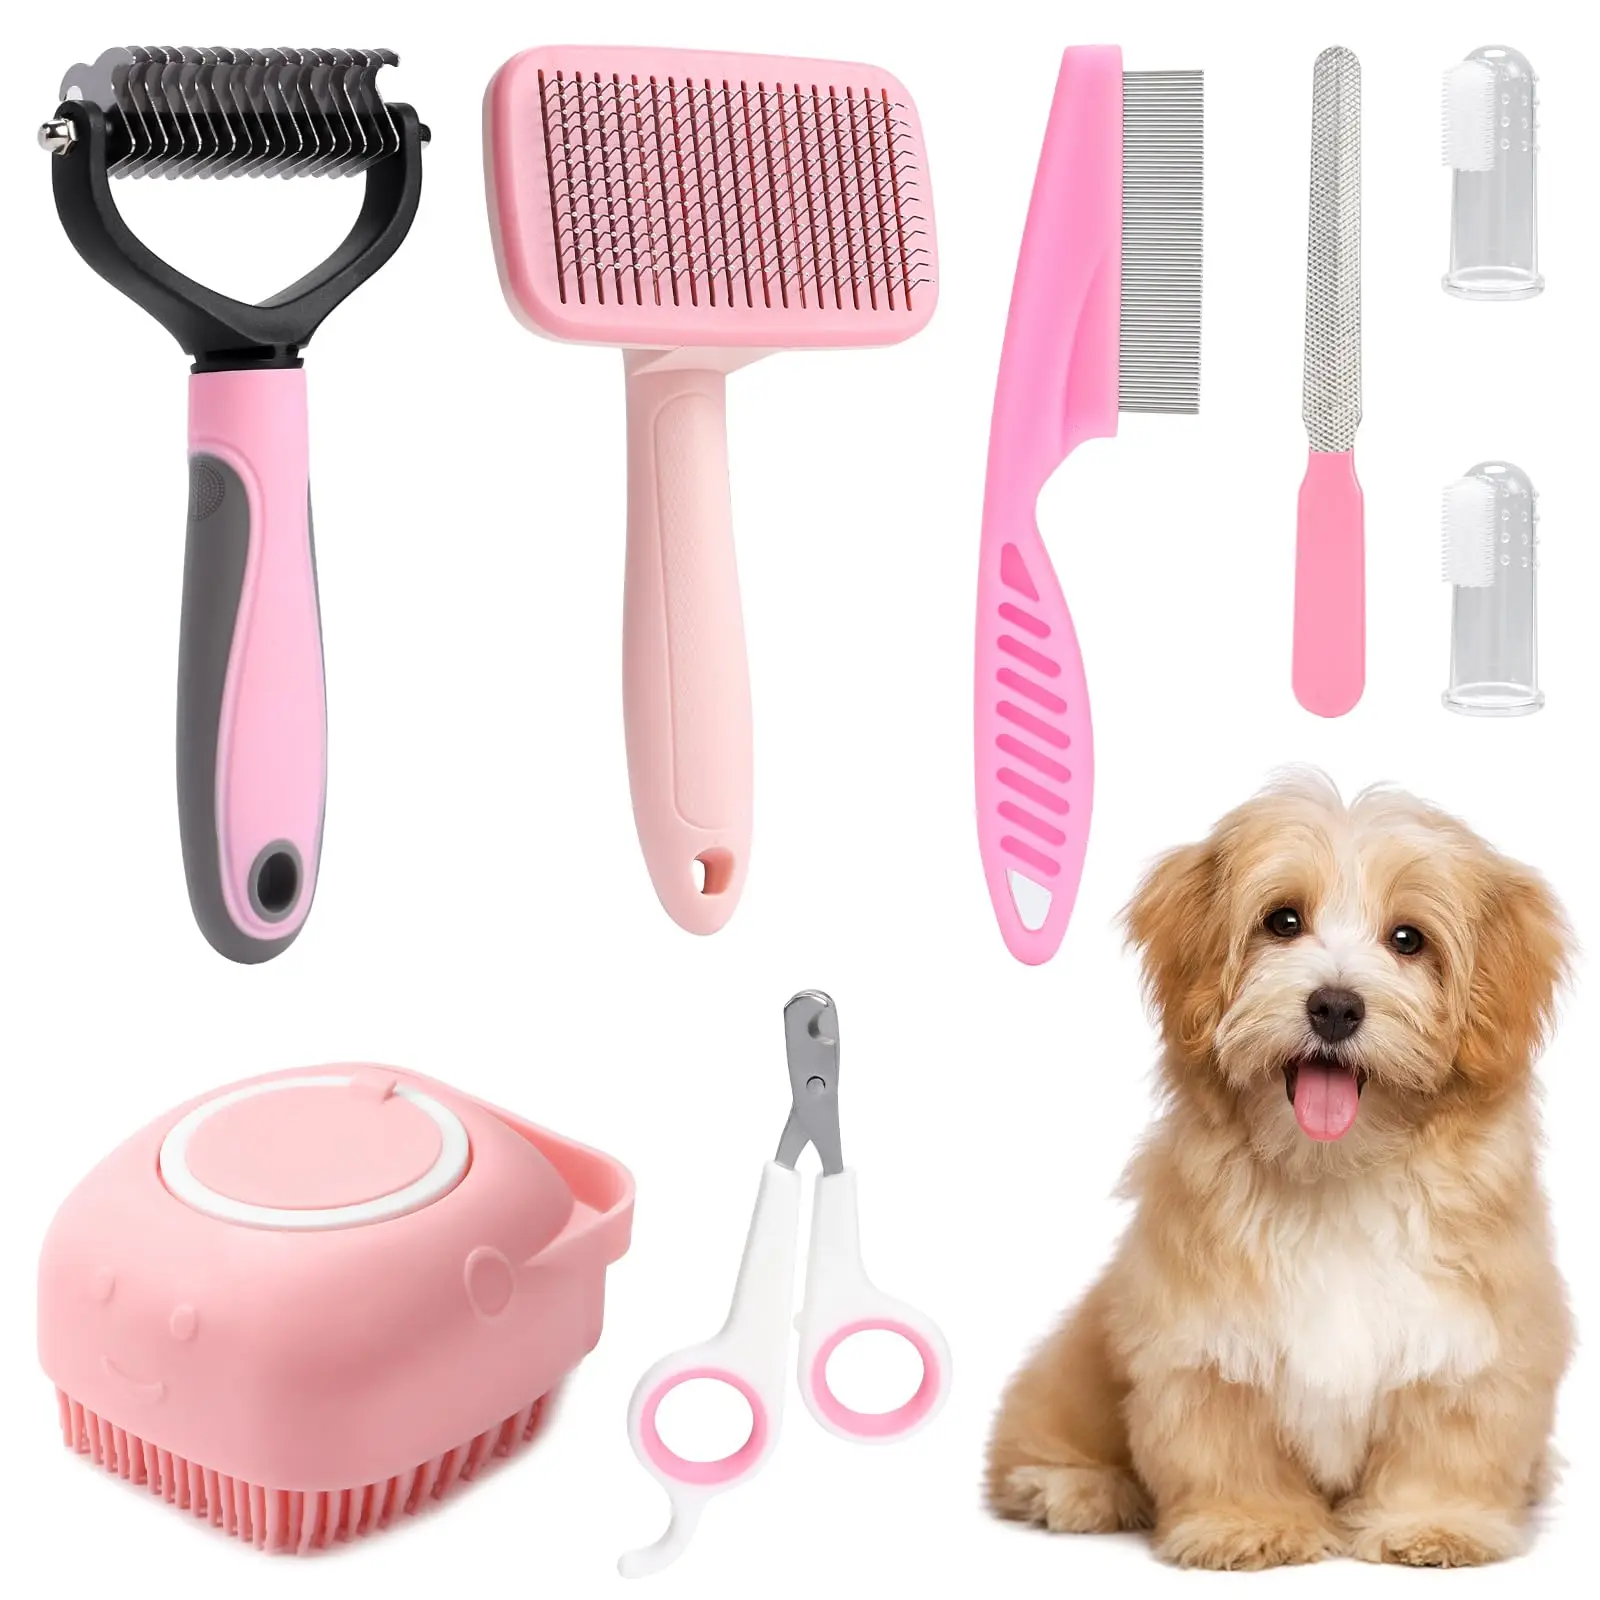 8-piece dog brush grooming set, pet self-cleaning set, with pet nail cli... - $14.38